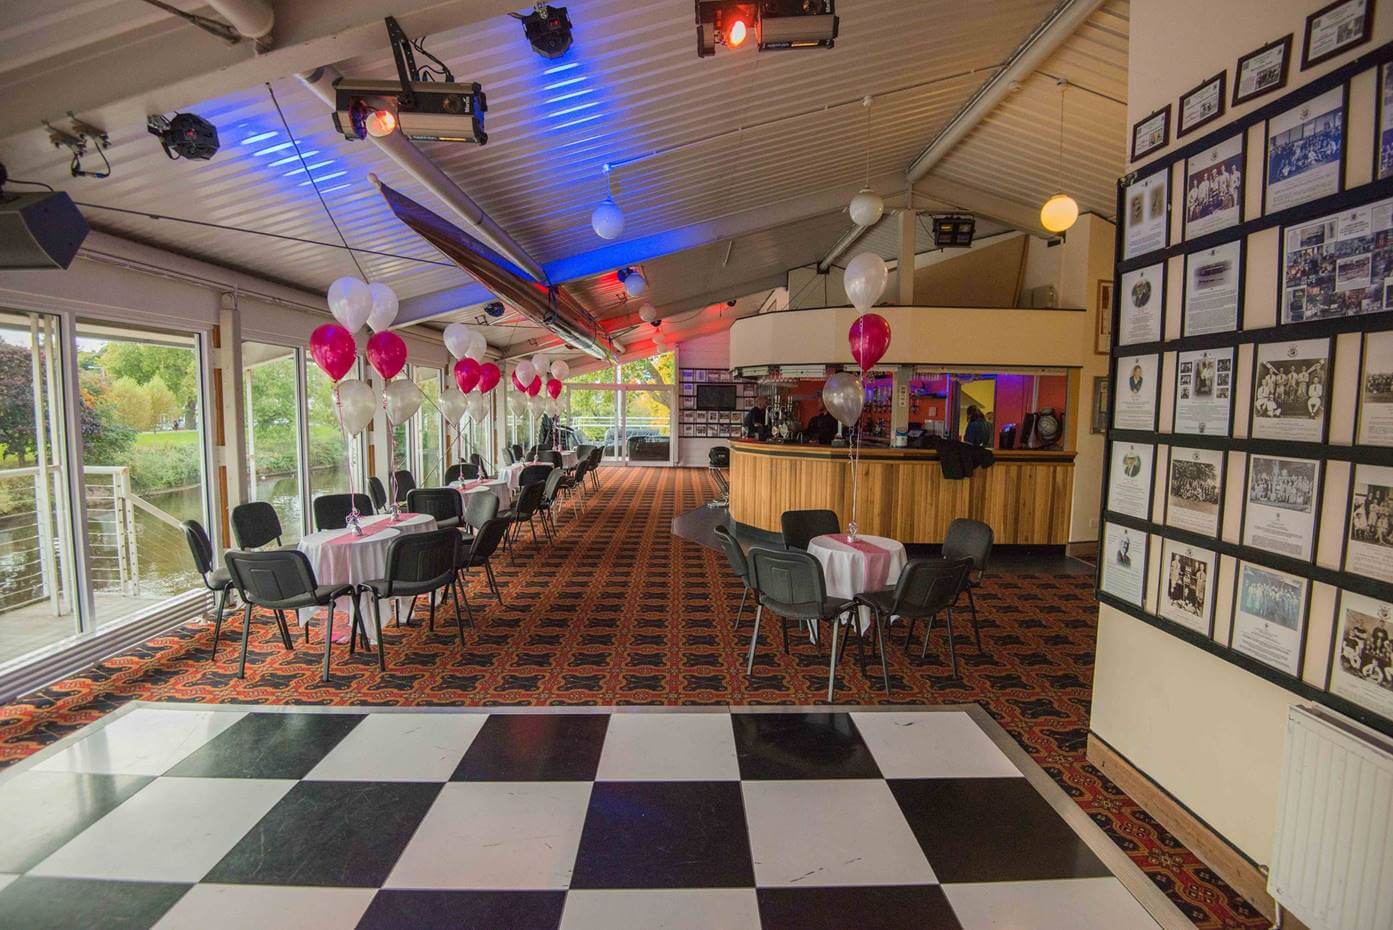 Our function room